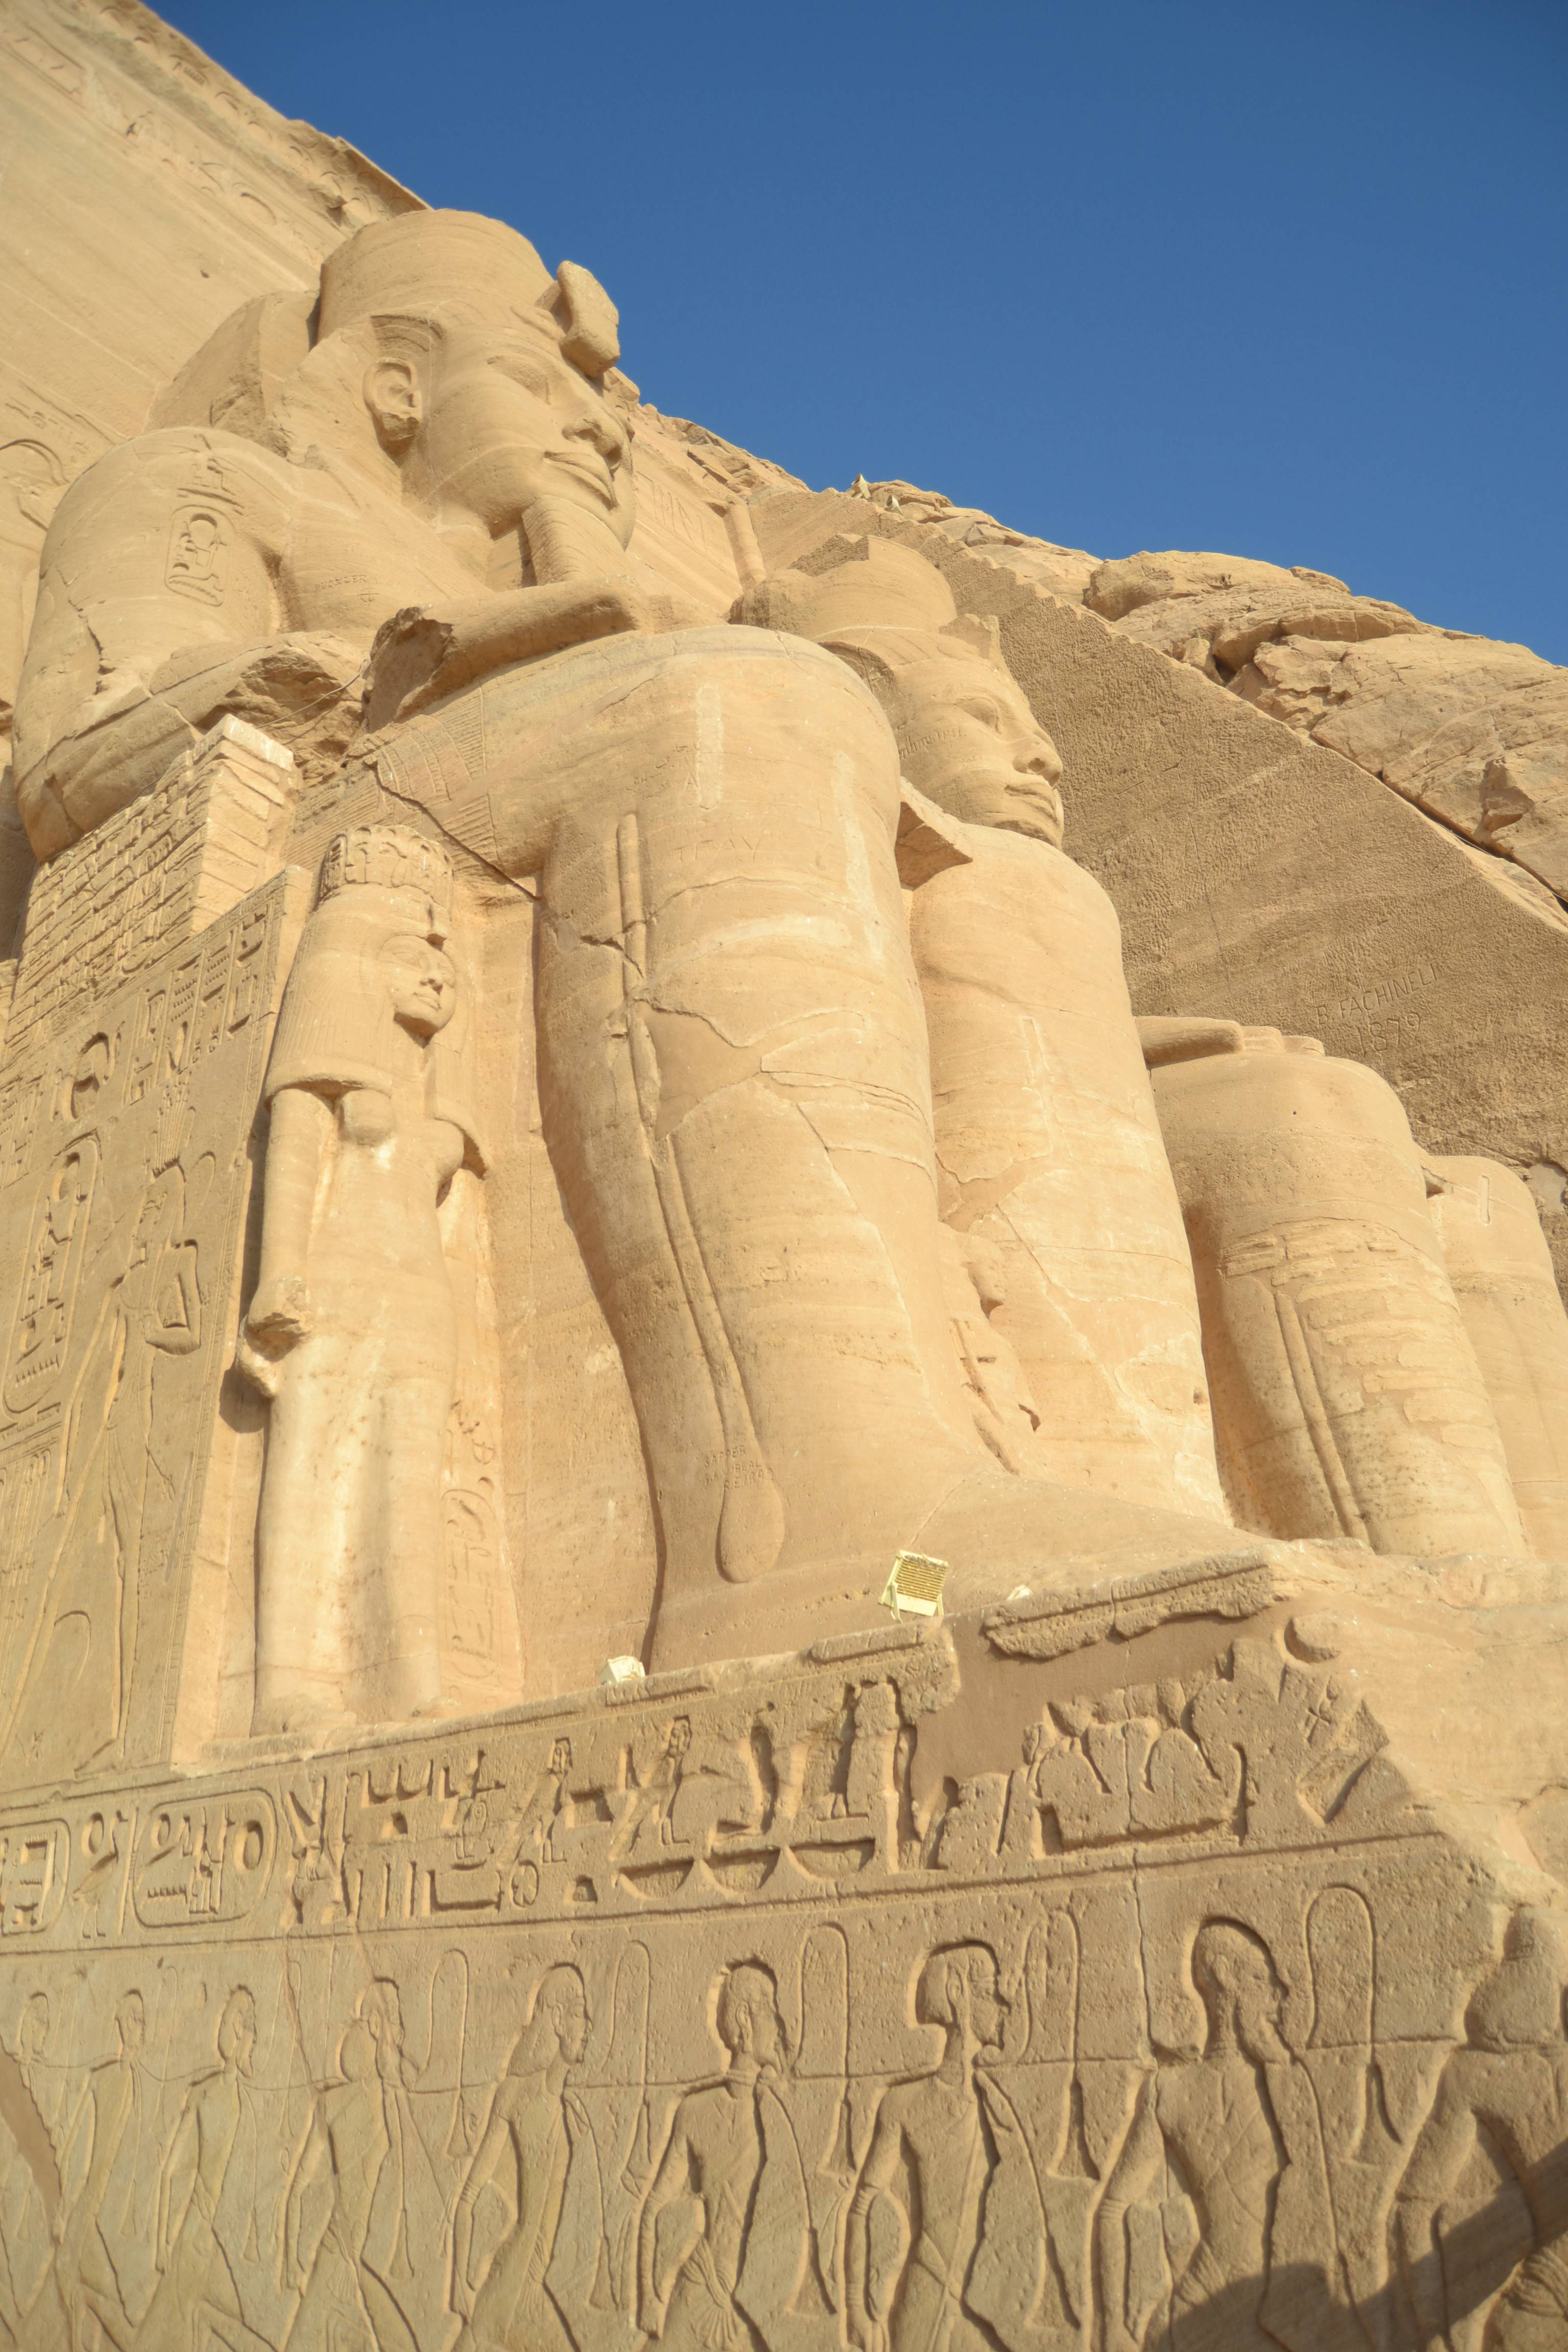 Abu Simbel statues - the statues of Ramses II with smaller statues of his children at his feet